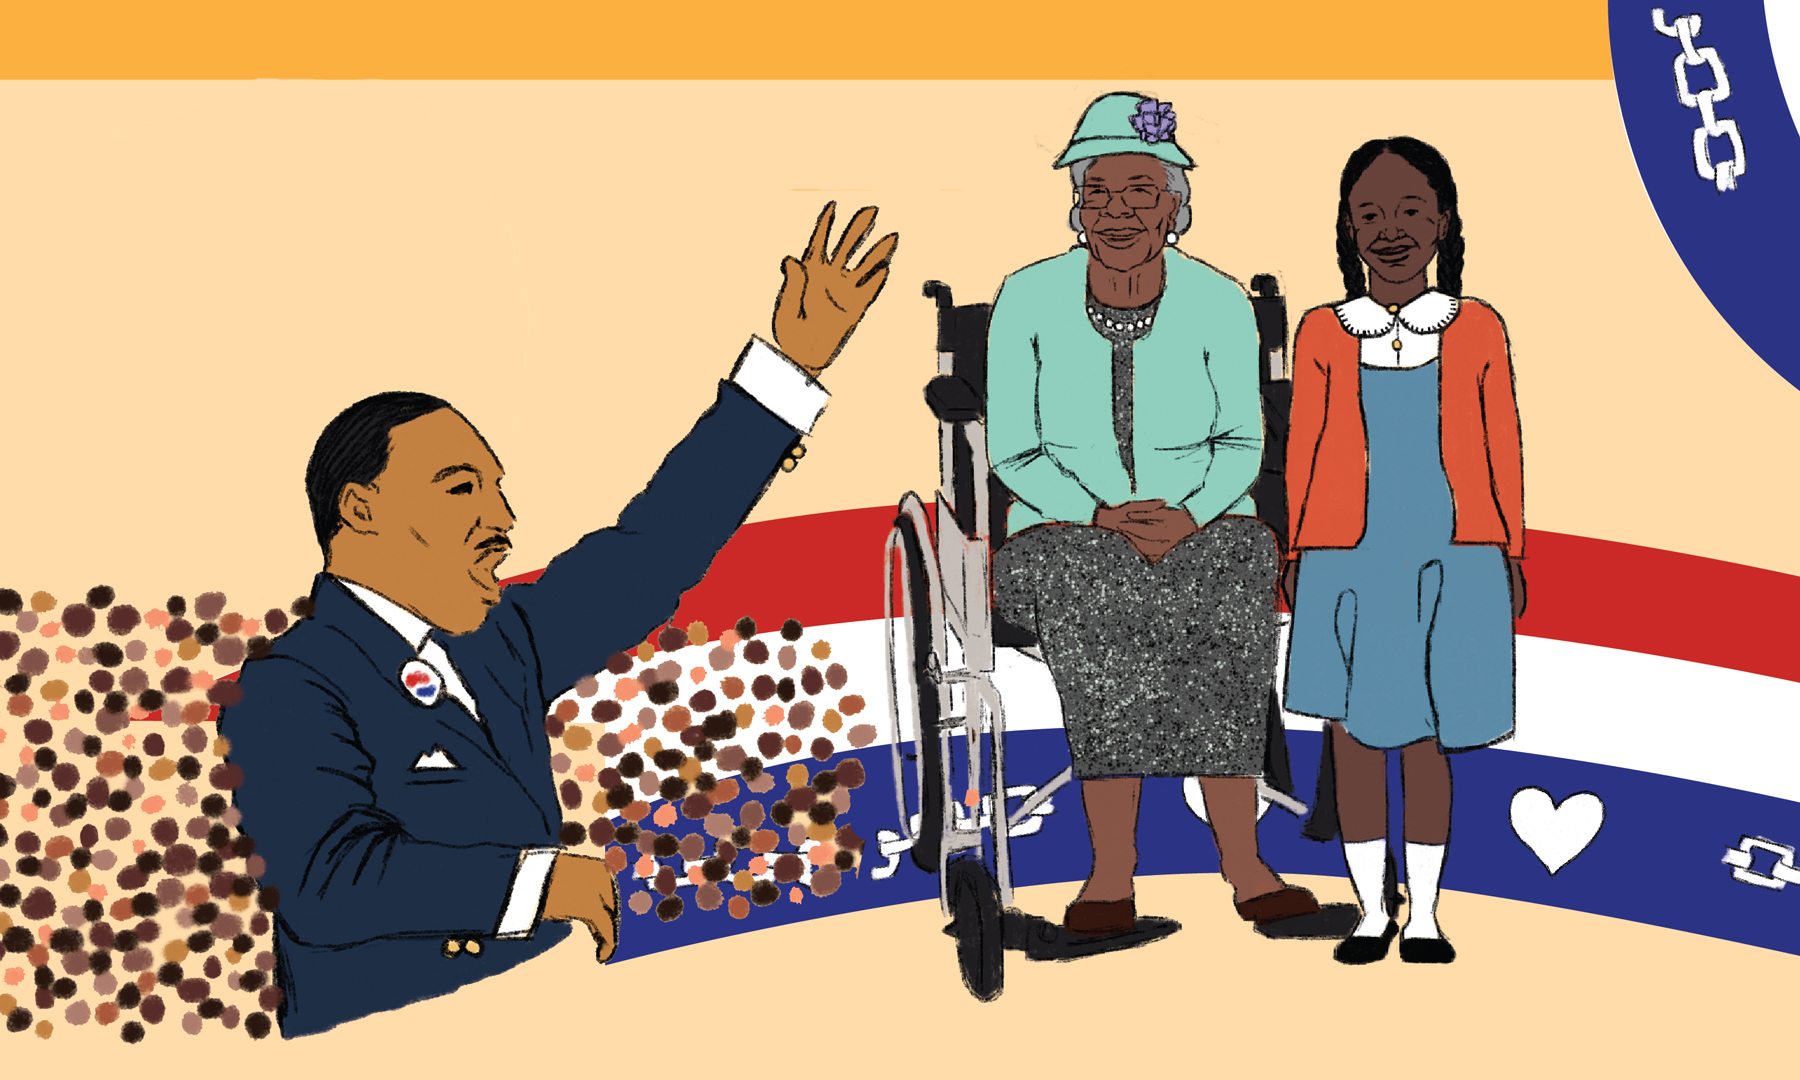 Illustration of Dr. Martin Luther King, Jr. and people listening to him.